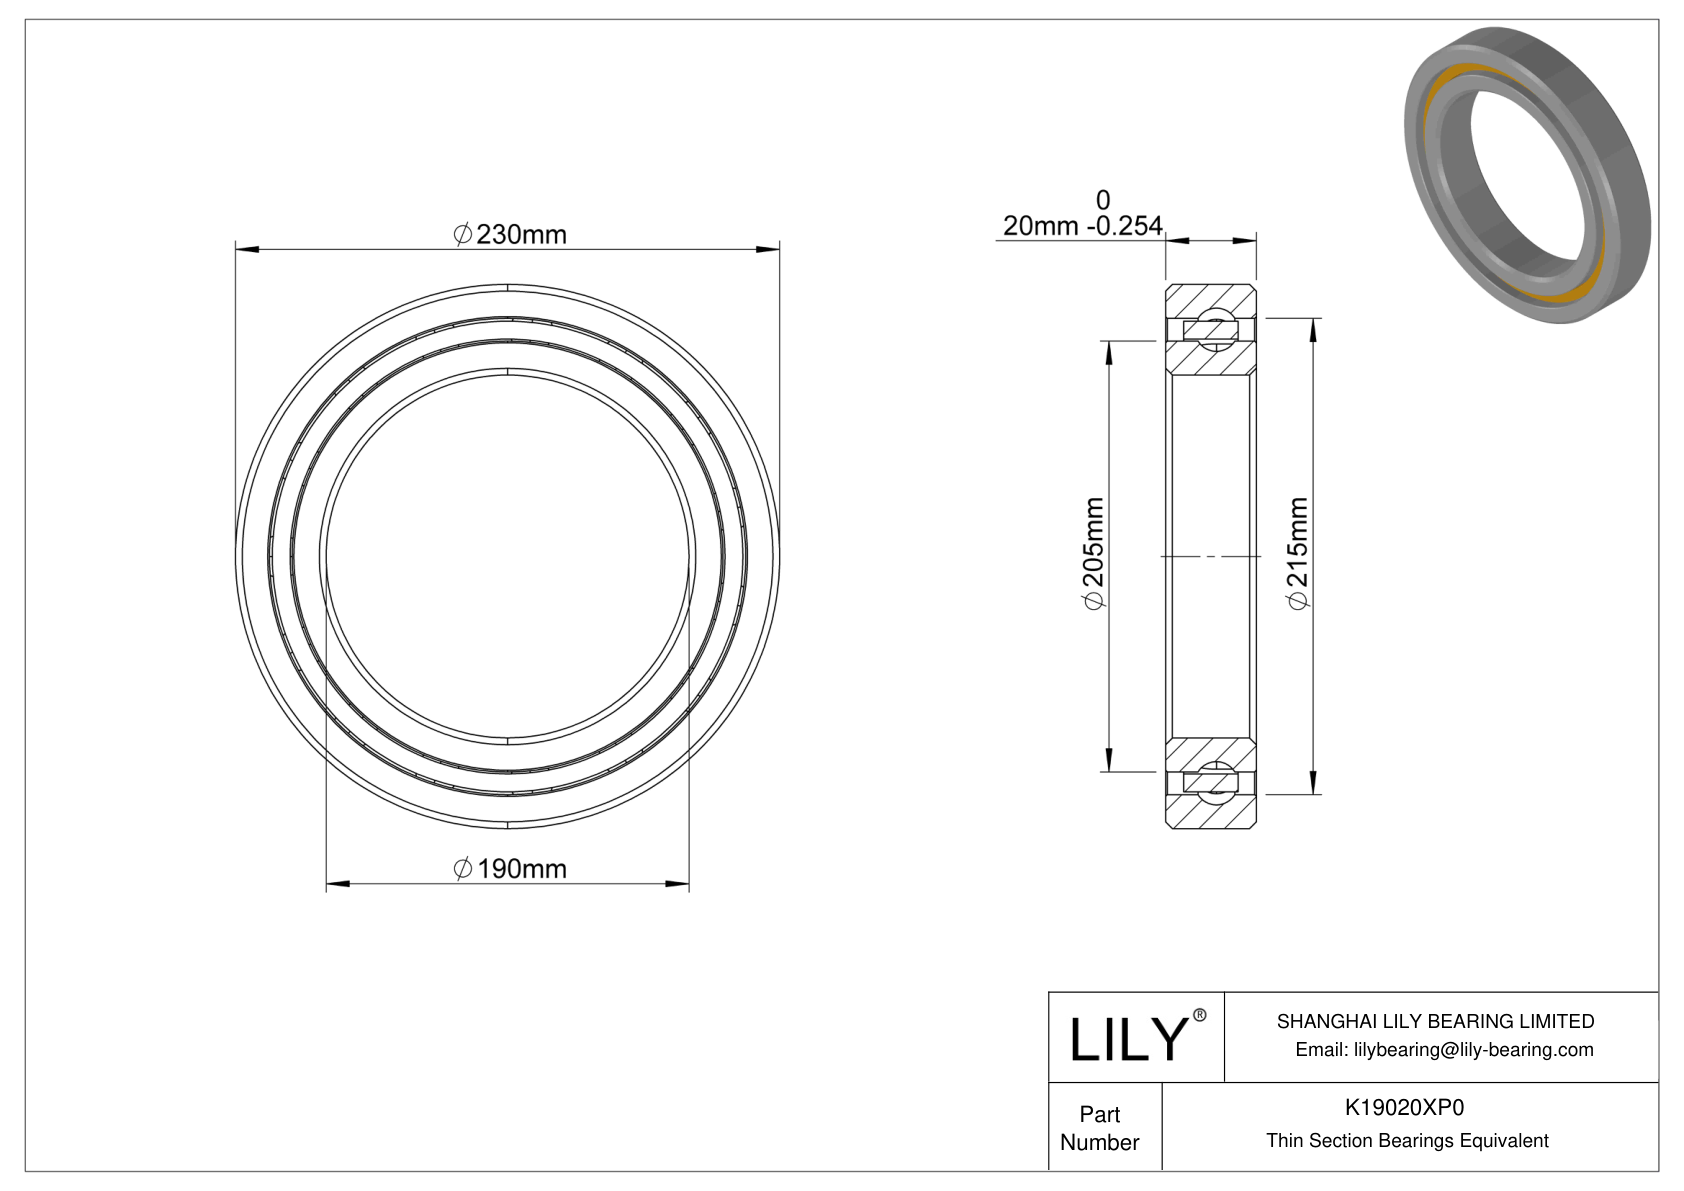 K19020XP0 Constant Section (CS) Bearings cad drawing